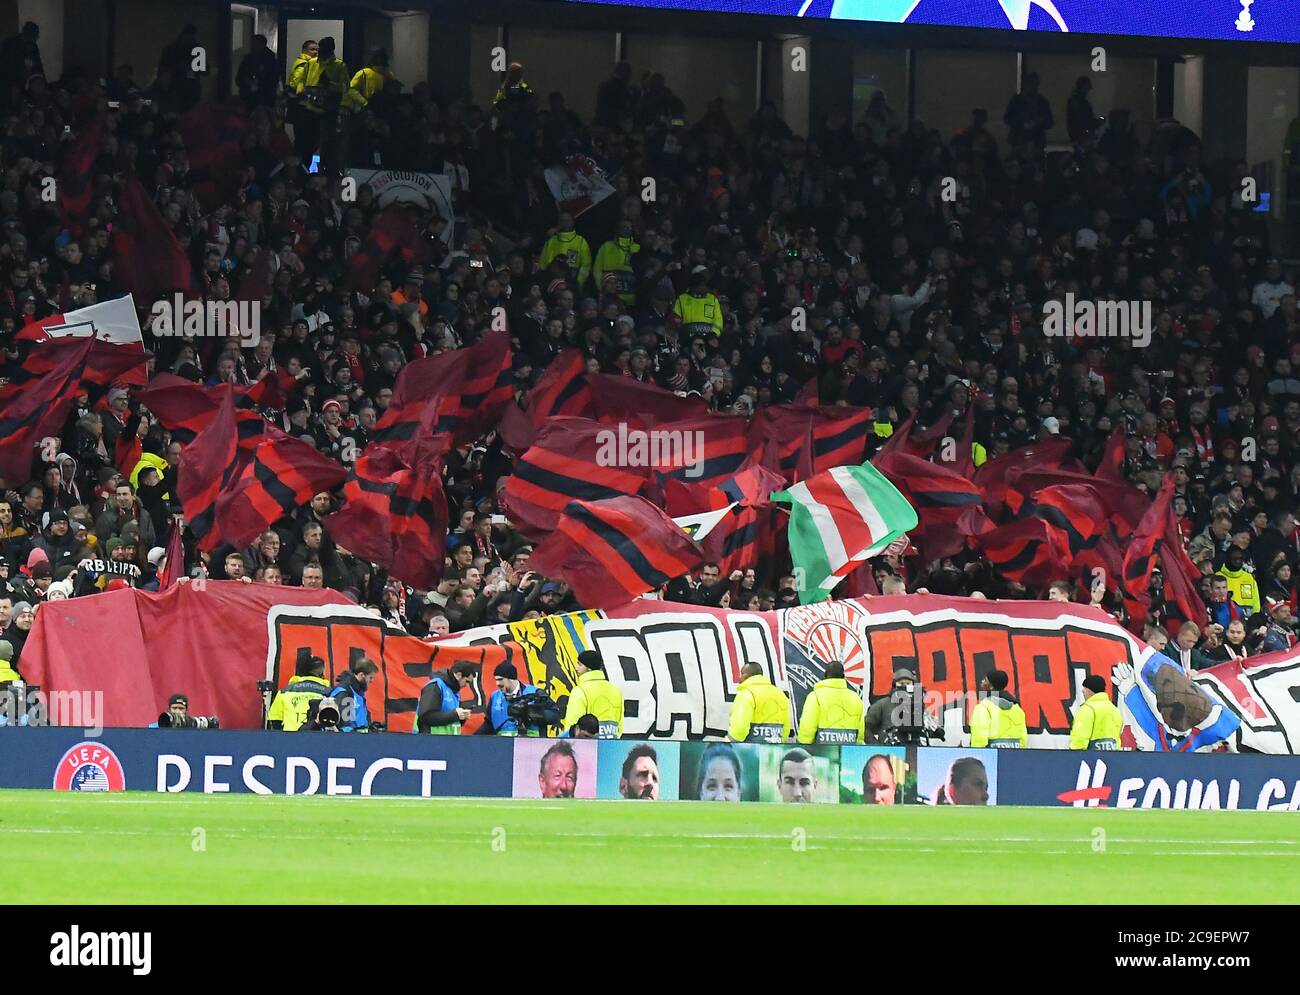 LONDON, ENGLAND - FEBRUARY 19, 2020: RB Leipzig fans pictured ahead of the first leg of the 2019/20 UEFA Champions League Round of 16 game between Tottenham Hotspur FC and RB Leipzig at Tottenham Hotspur Stadium. Stock Photo